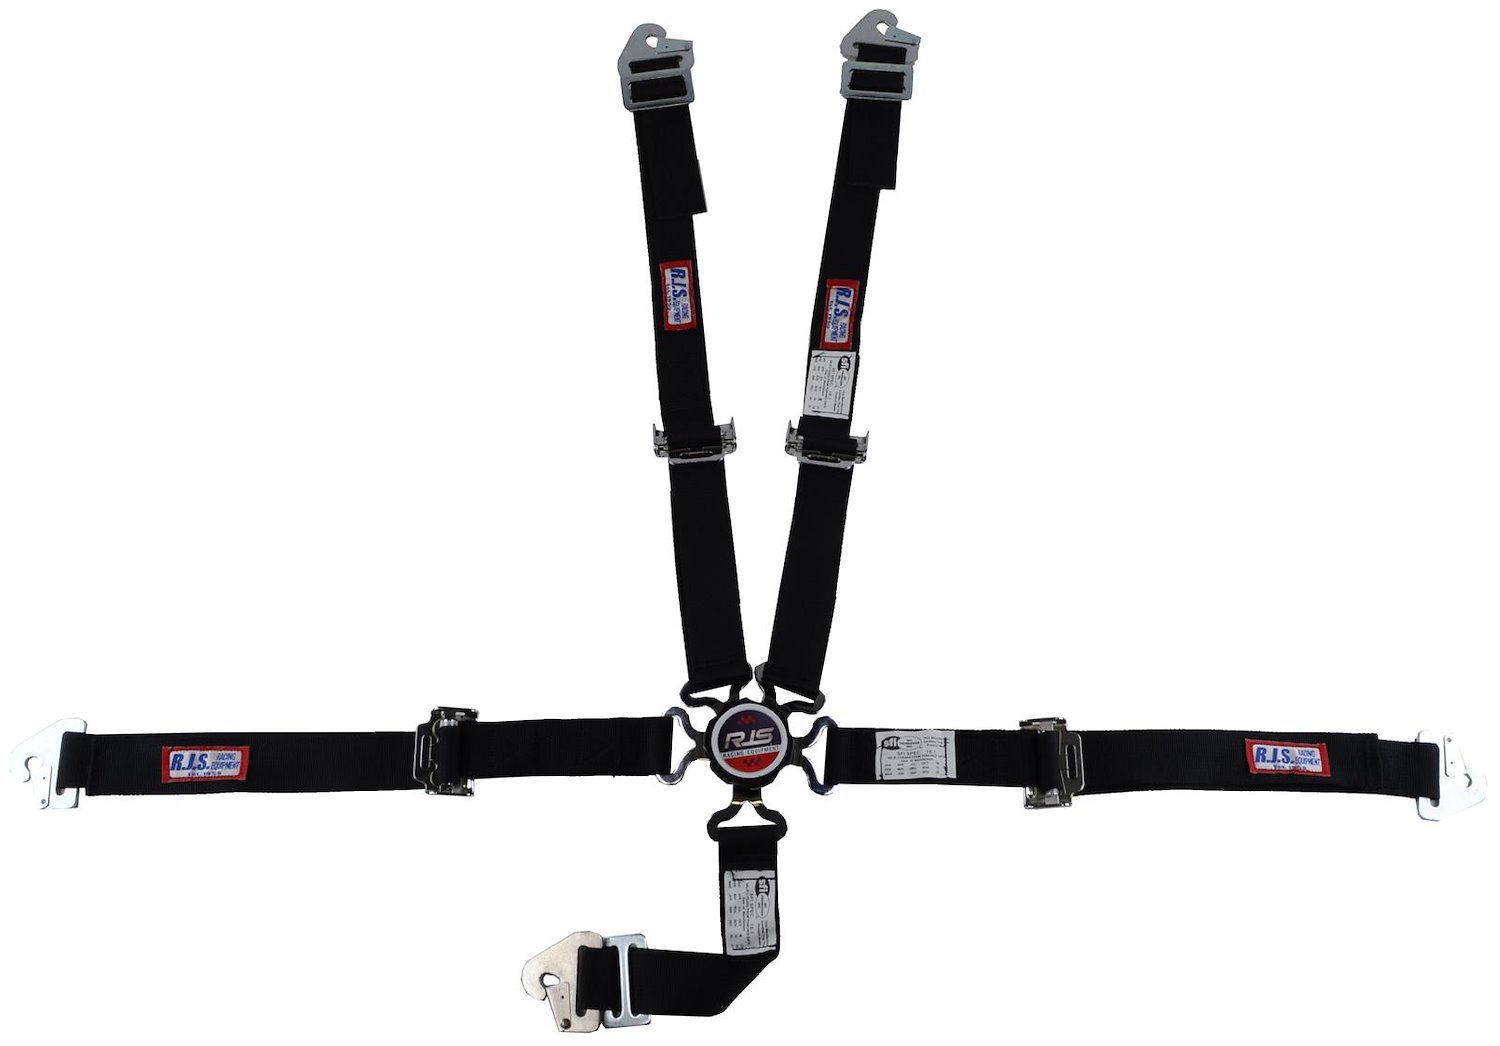 SFI 16.1 CAM-LOCK HARNESS 2 PULL UP Lap Belt 2 Shoulder Harness U ROLL BAR Mount 2 DOUBLE Sub ALL WRAP ENDS GRAY